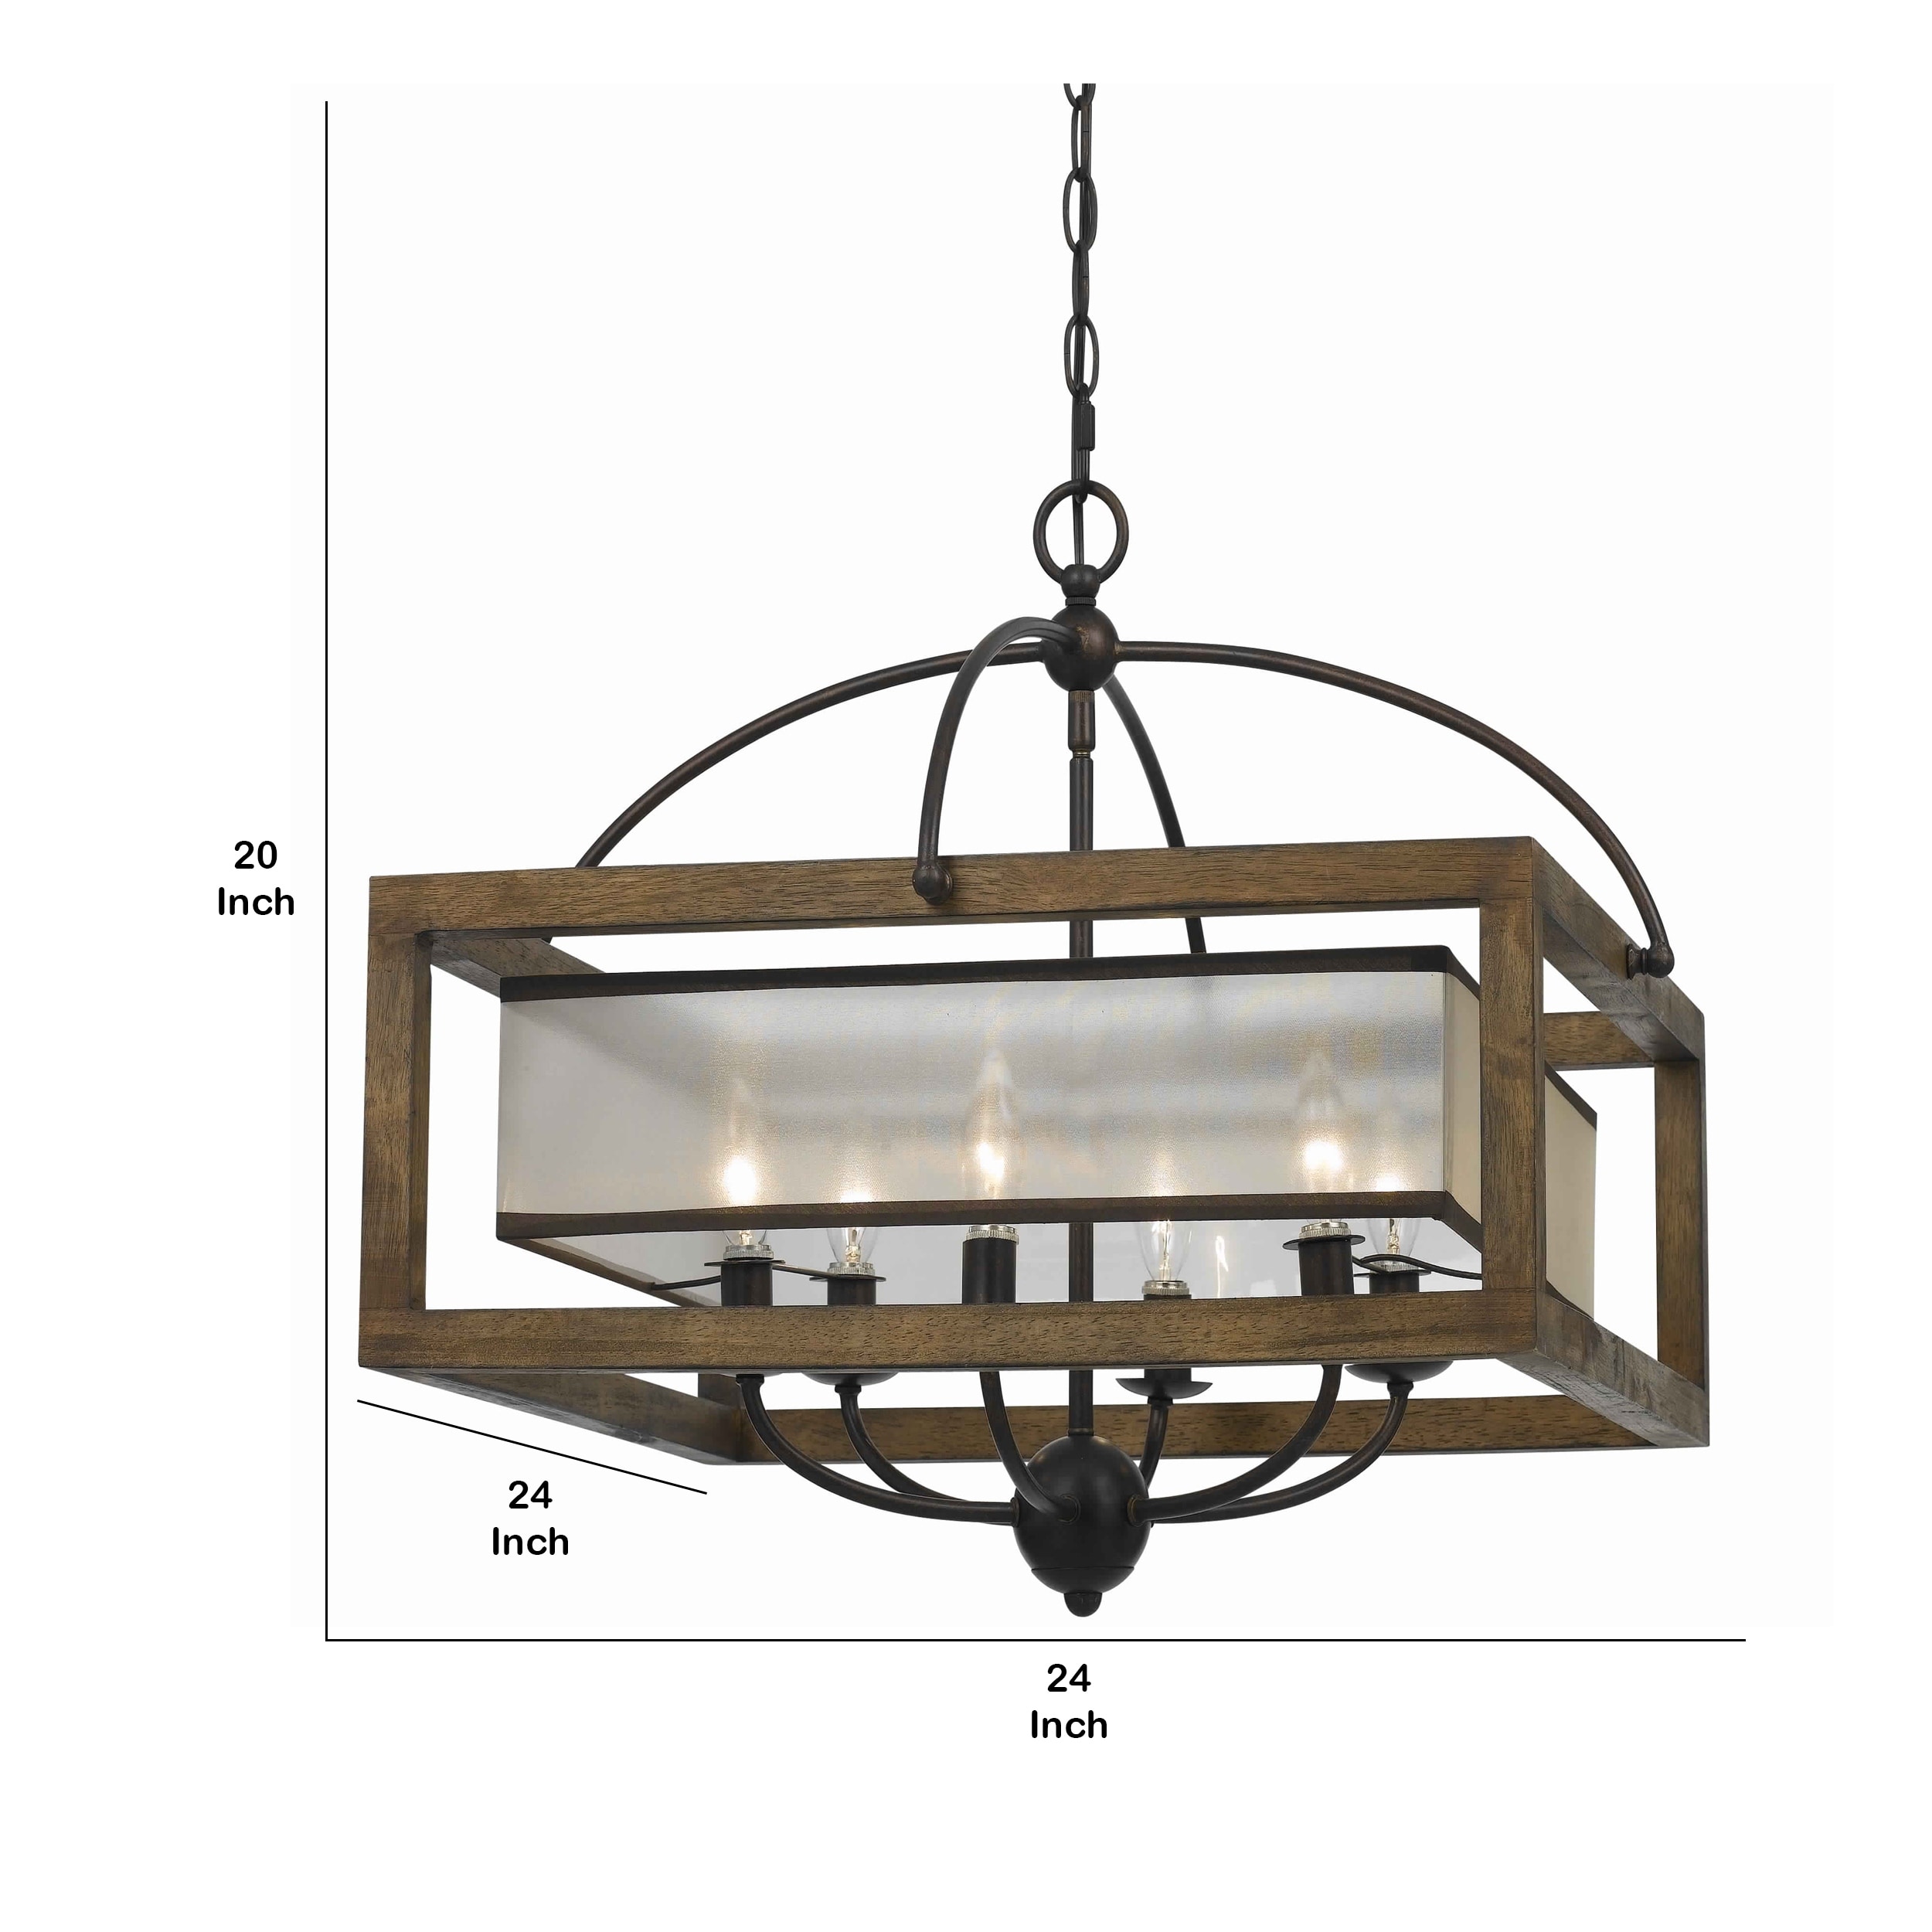 6 Bulb Square Chandelier with Wooden Frame and Organza Striped Shade, Brown - image 5 of 5